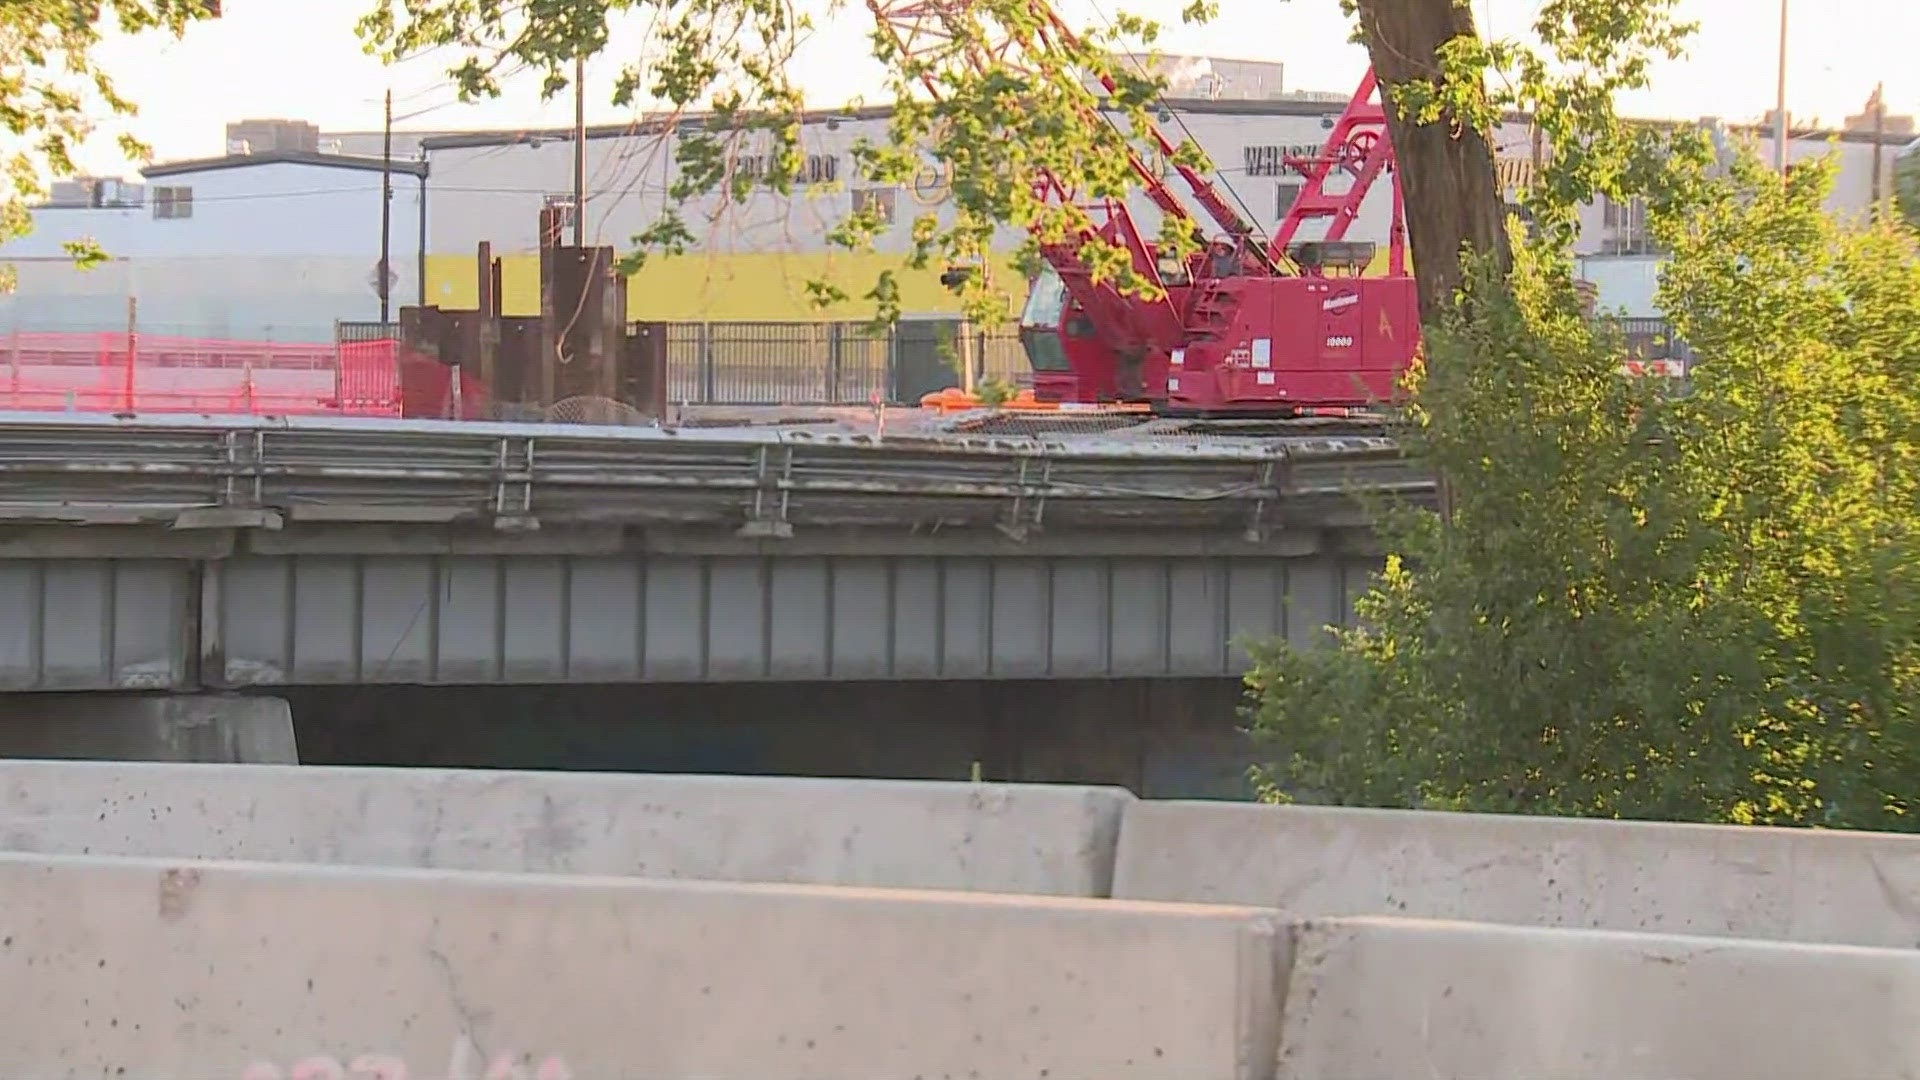 CDOT is in the midst of a project to replace the 113-year-old Alameda Bridge over Interstate 25 and the South Platte River in Denver.